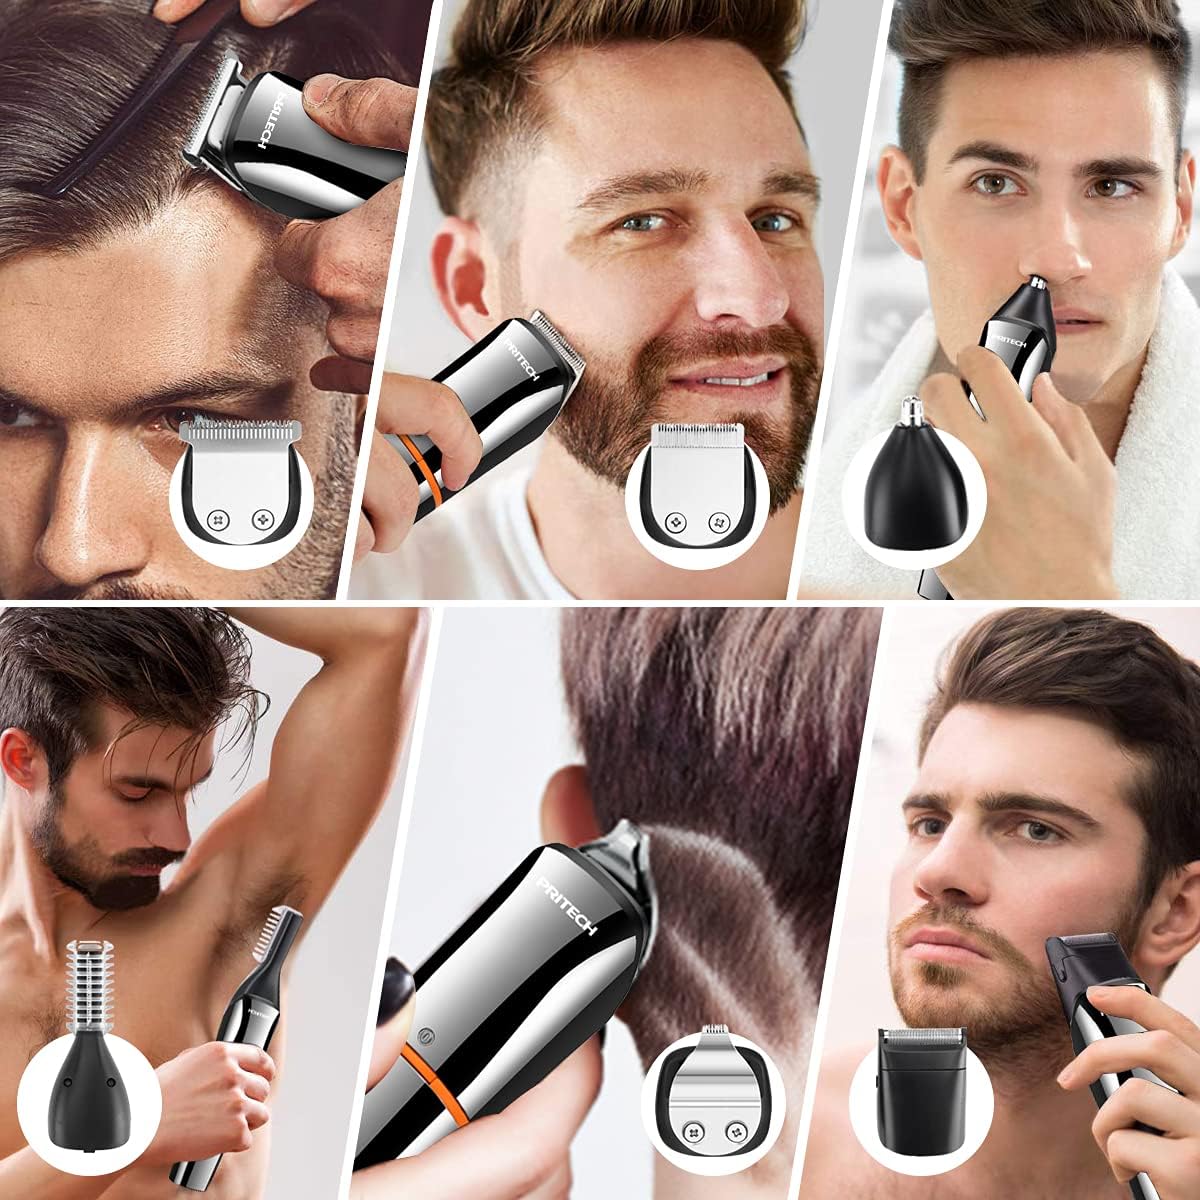 Hair Trimmers,Beard Trimmer,6 in 1 Kit Electric Cordless Nose Trimmer Mens Grooming Trimmer for Beard Head Face and Body Waterproof IPX7 USB Rechargeable LED Power Display by Pritech